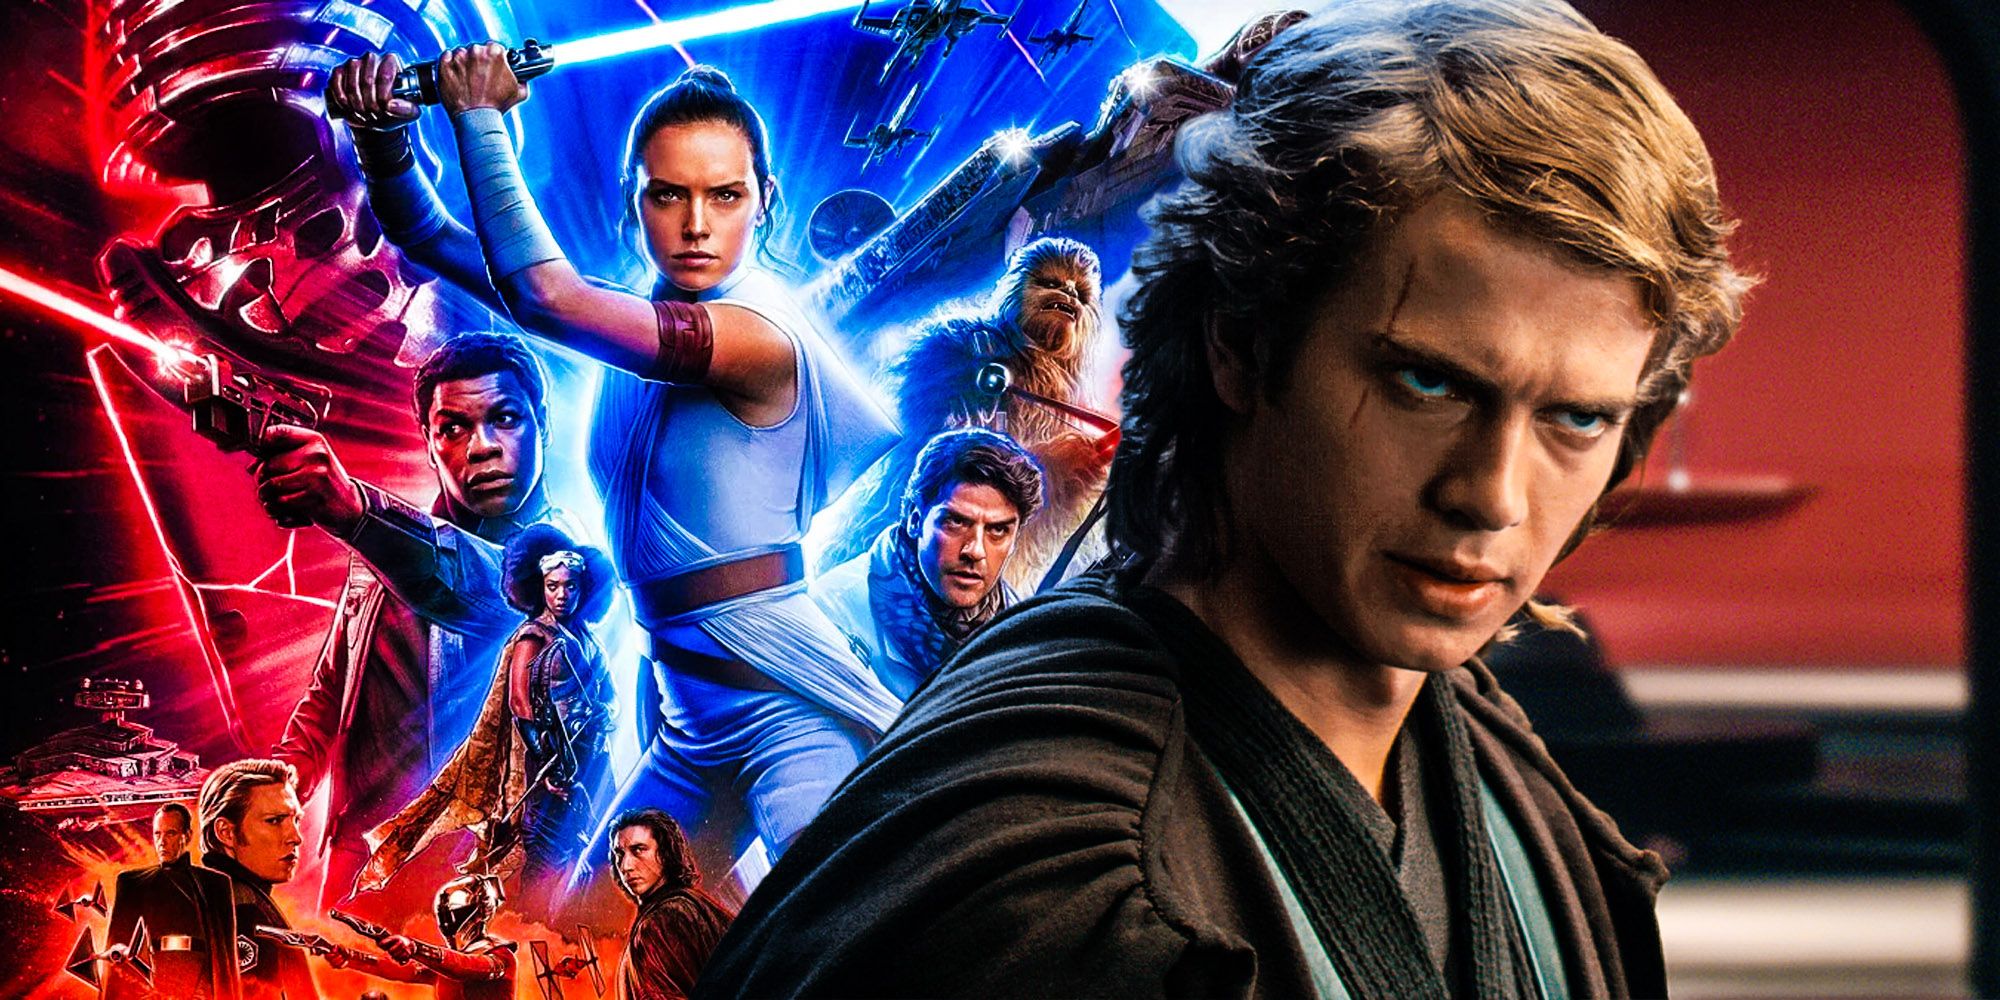 Star Wars Sequels Have The Opposite Problem To The Prequels